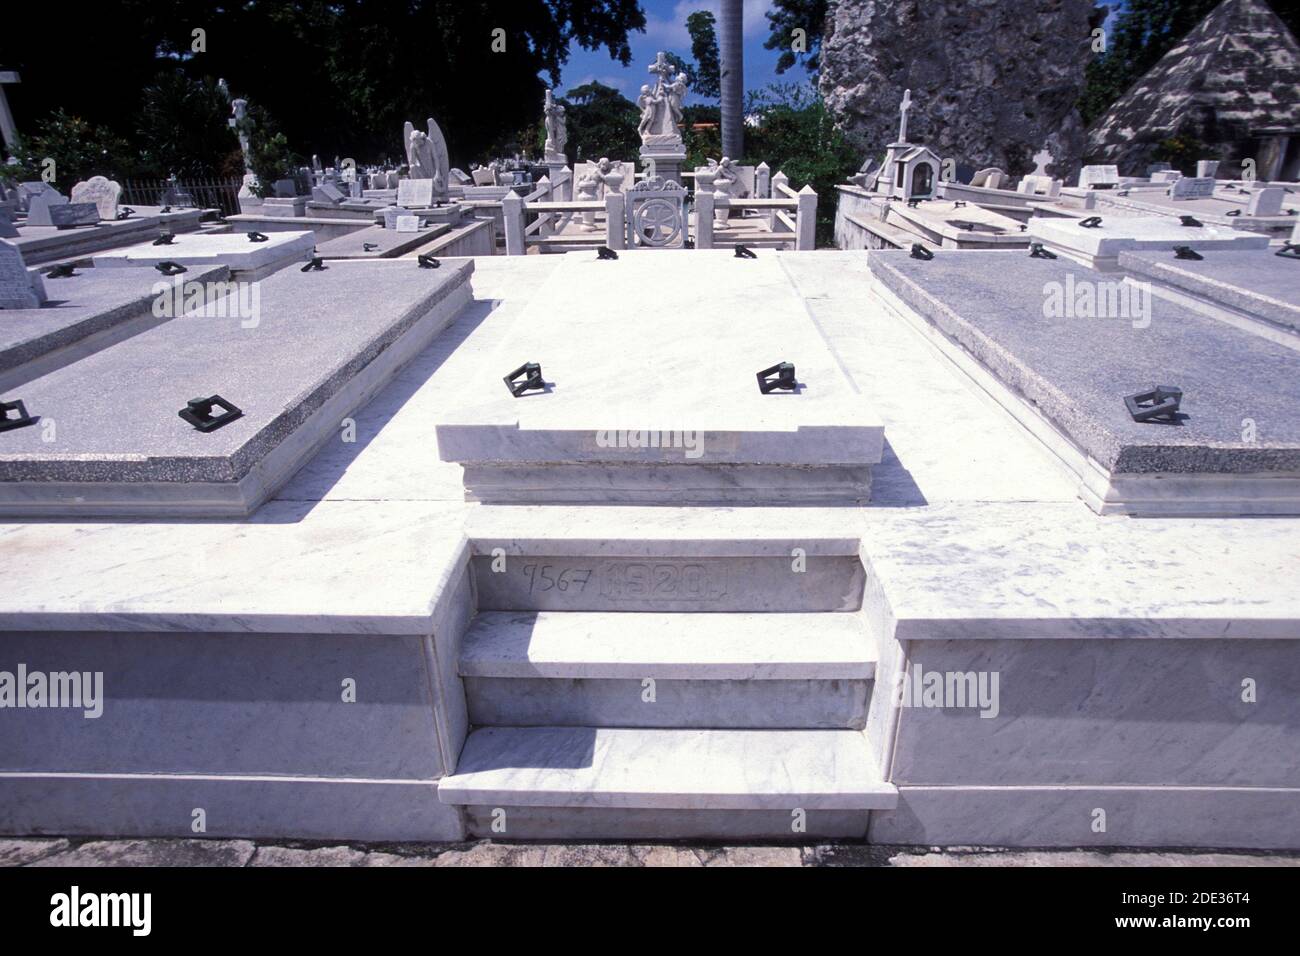 the grave of Ibrahim Ferrer of the Buena vista social club at the Cemetery of Necropolis Cristobal Colon  in the city of Havana on Cuba in the caribbe Stock Photo